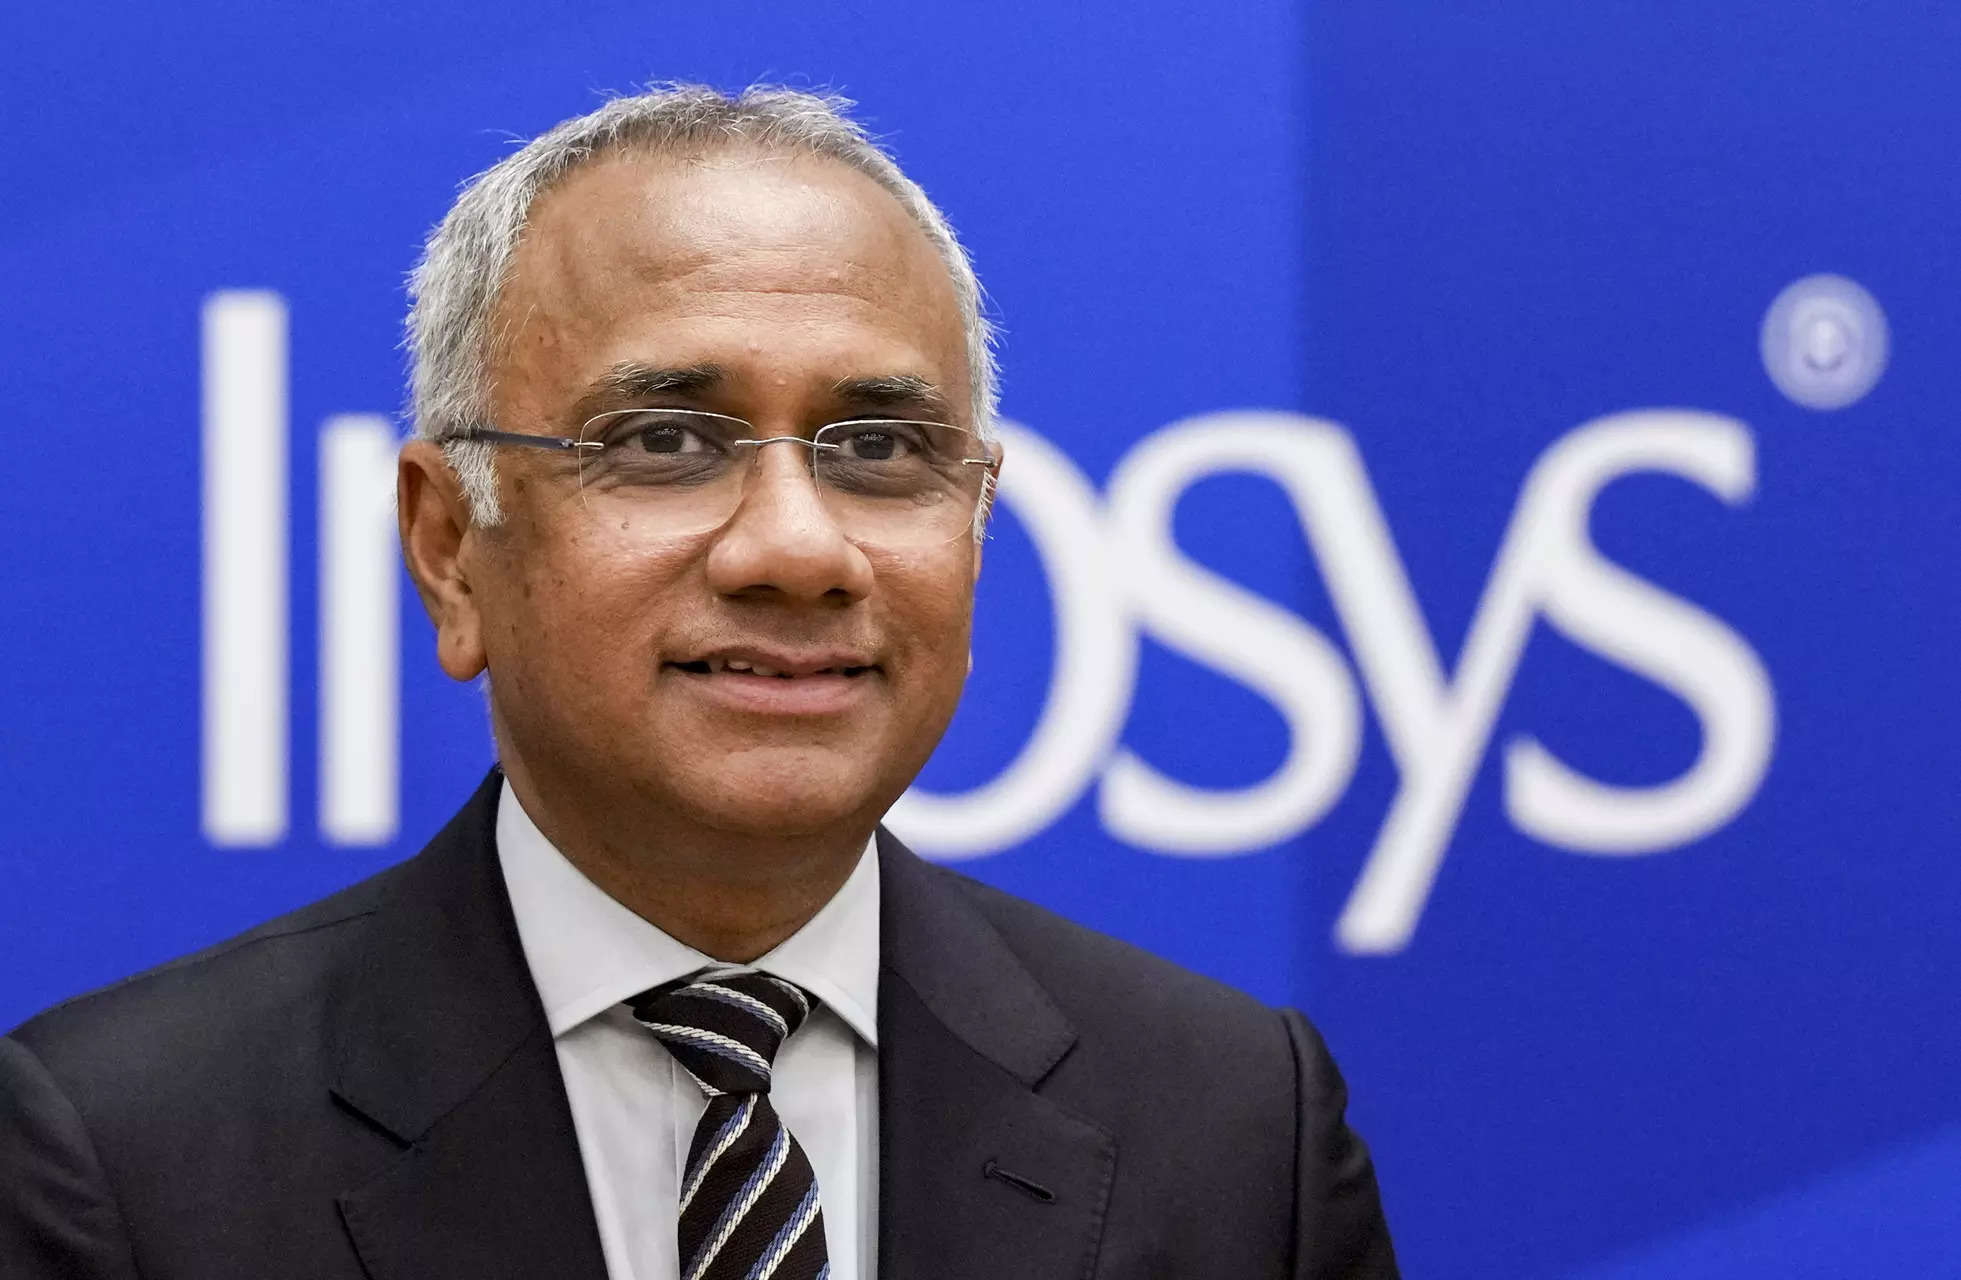 Infosys CEO and MD Salil Parekh during the announcement of Quarter 1